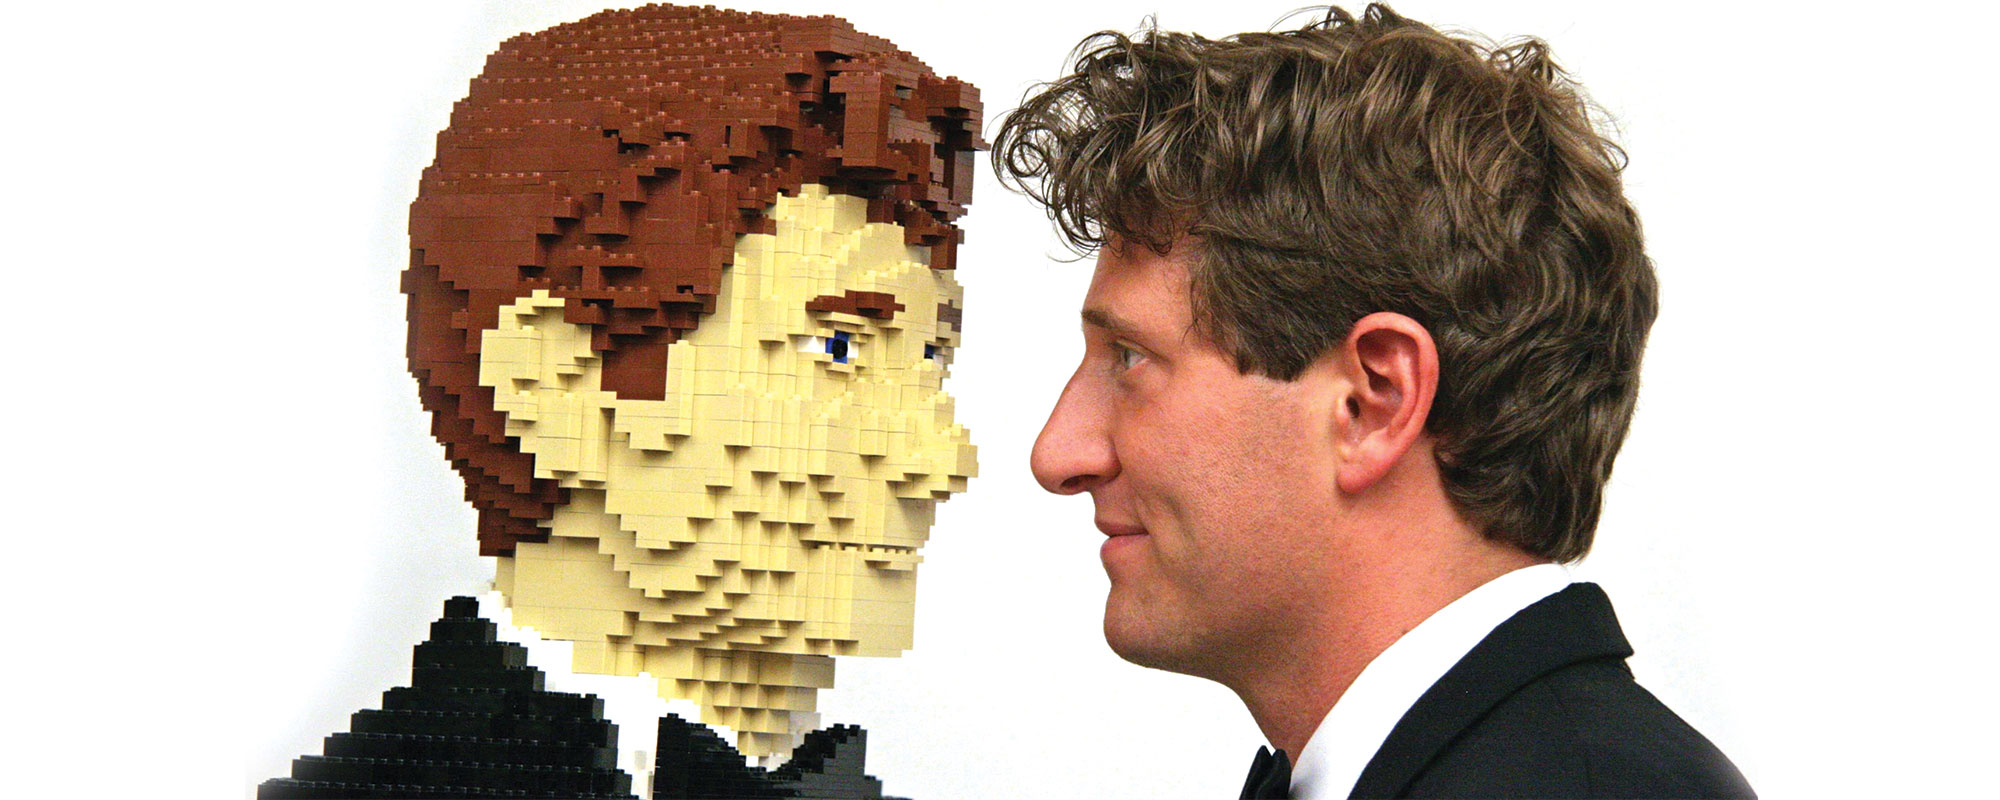 The artist facing to face with a replica of himself made from lego bricks.